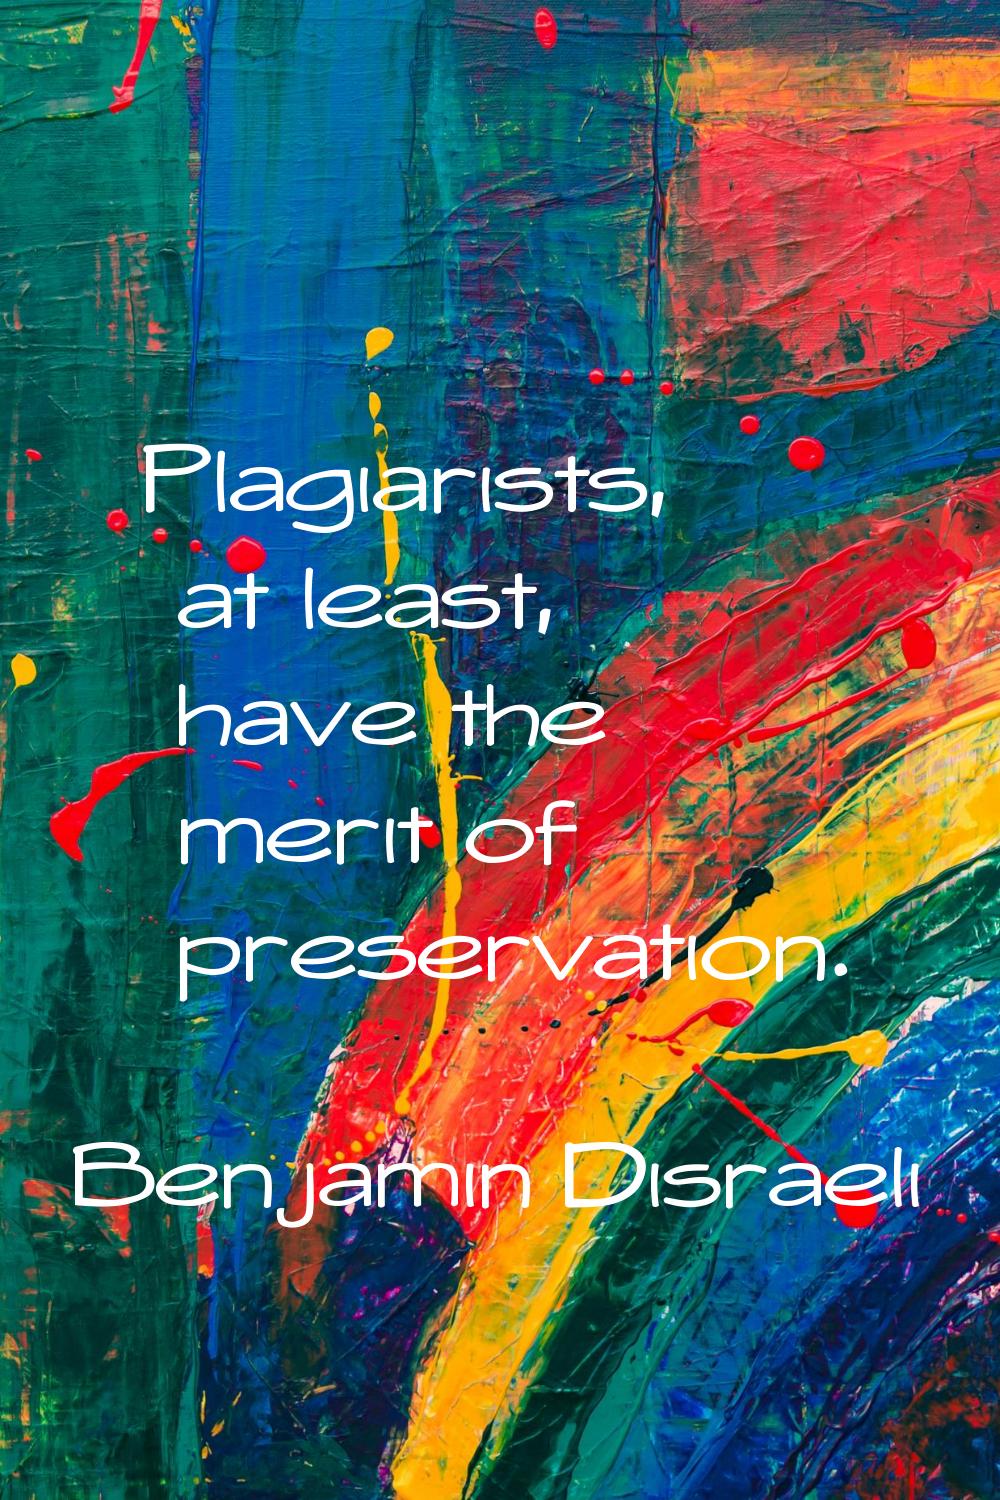 Plagiarists, at least, have the merit of preservation.